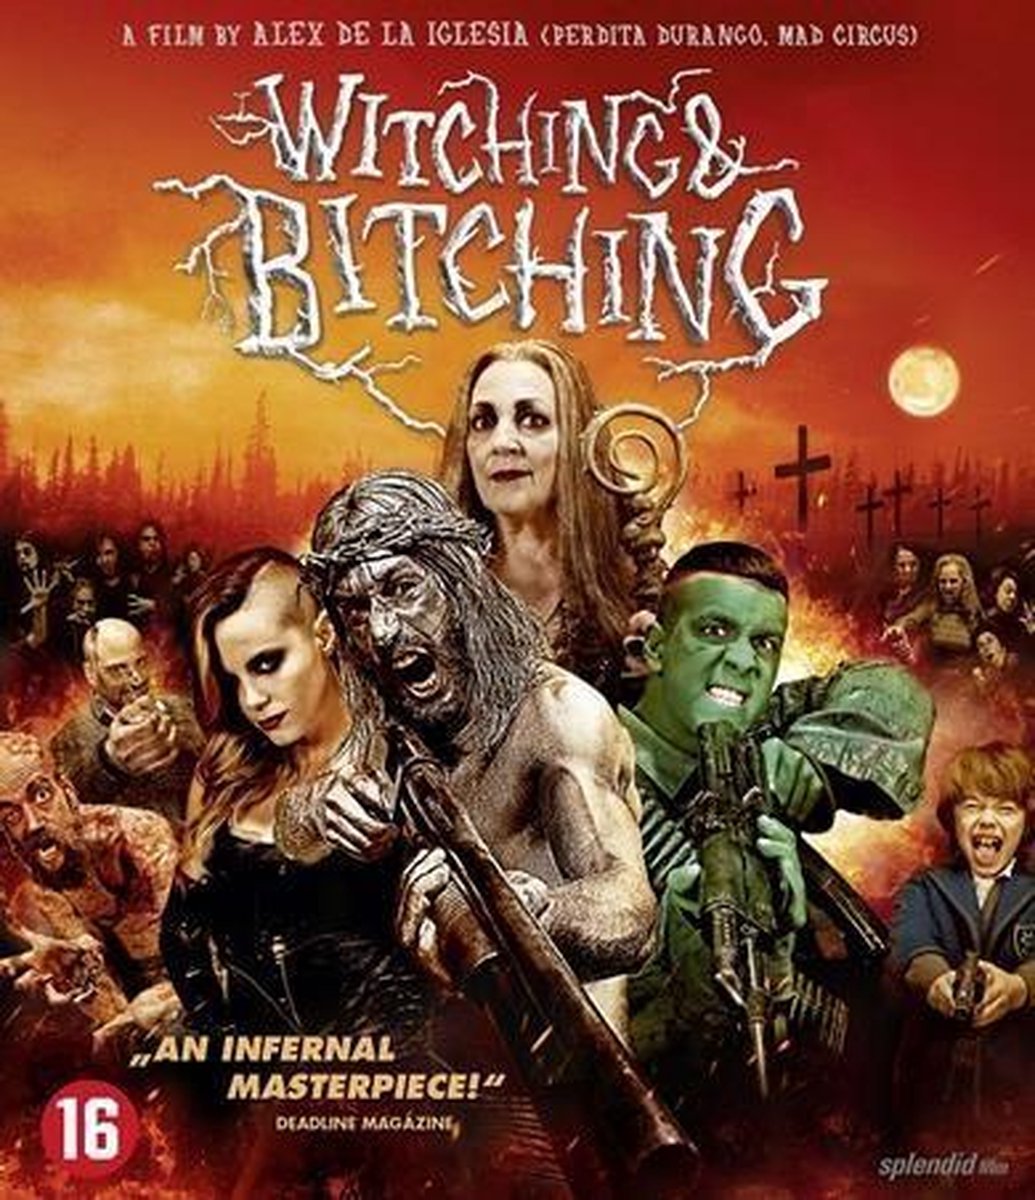 Witching And Bitching (Blu-ray)